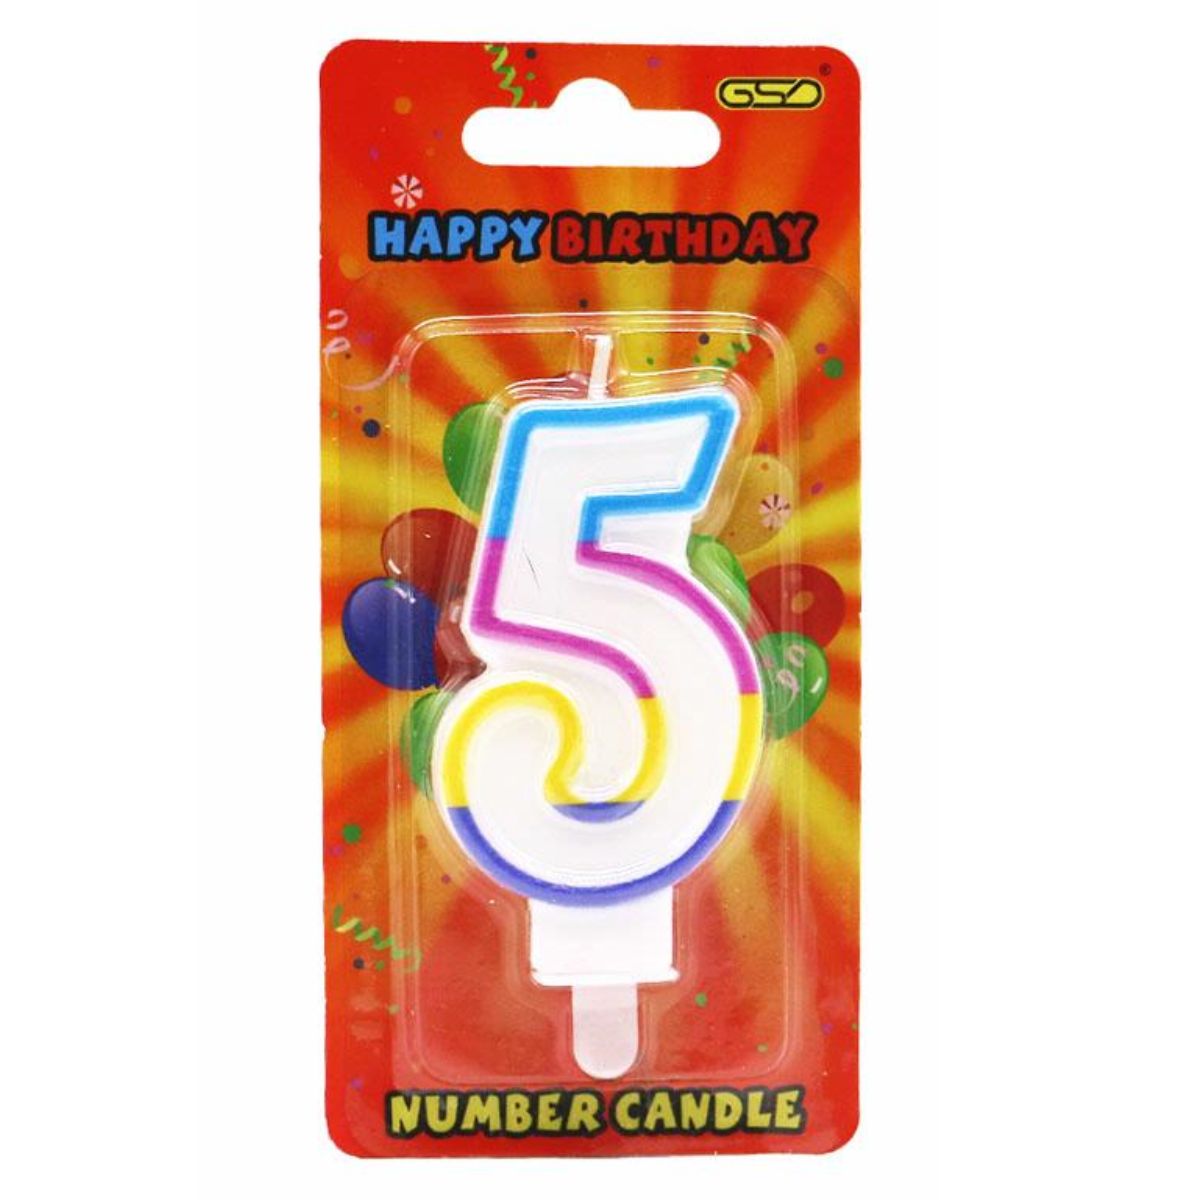 A GSD - Birthday Candle Number 5 - 1pcs with a number 5 on it.